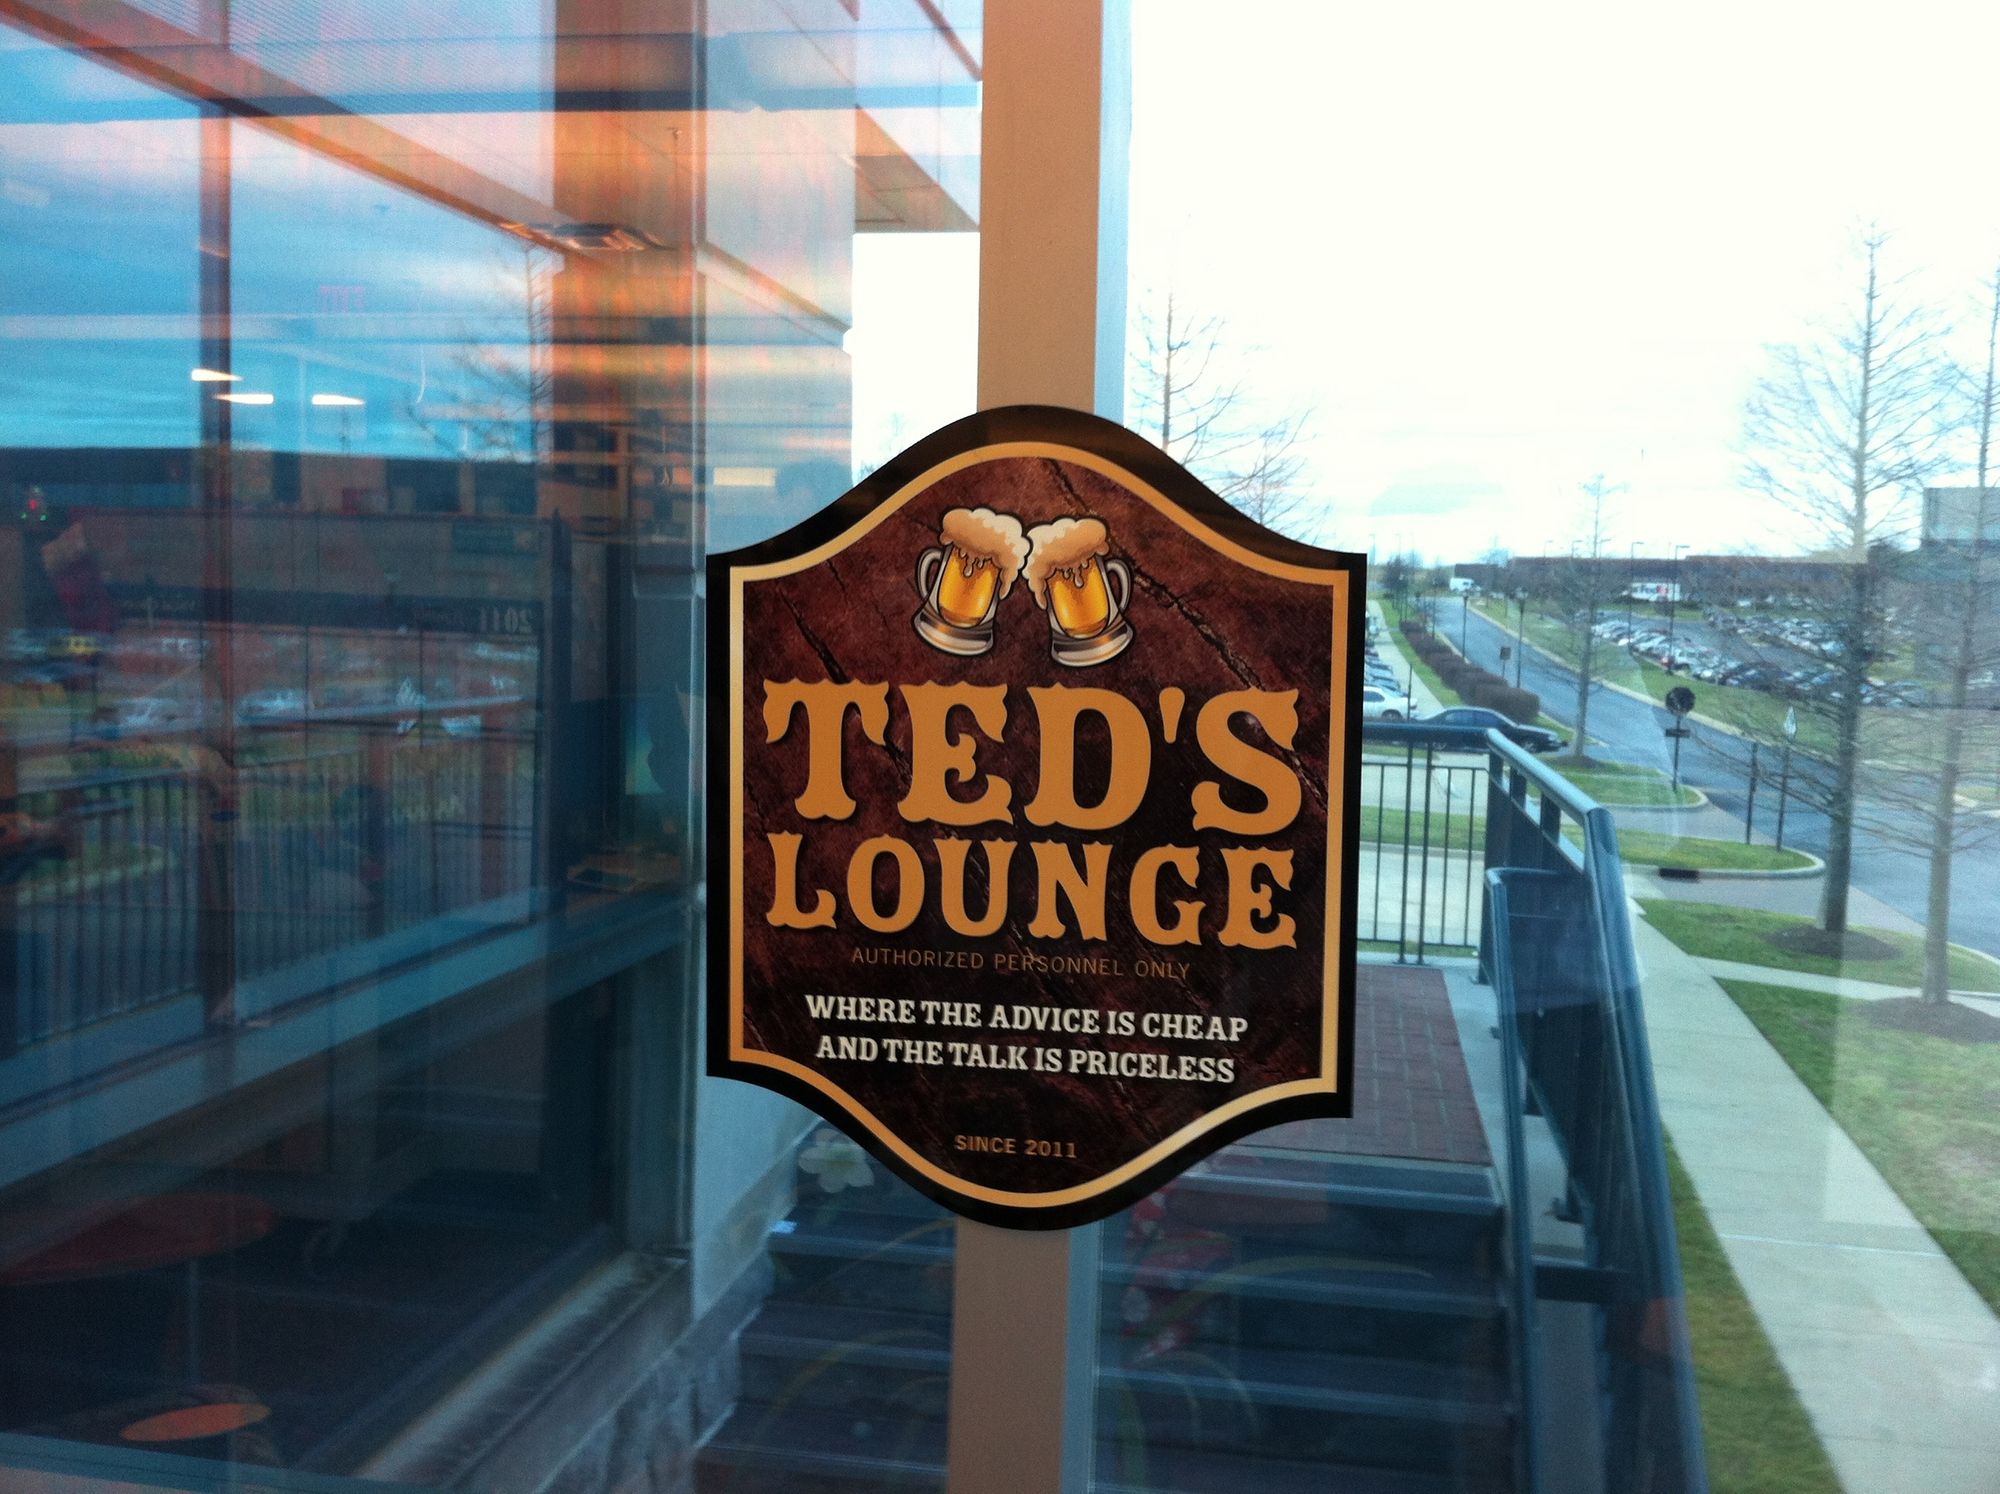 Ted's Lounge #tinychallenges